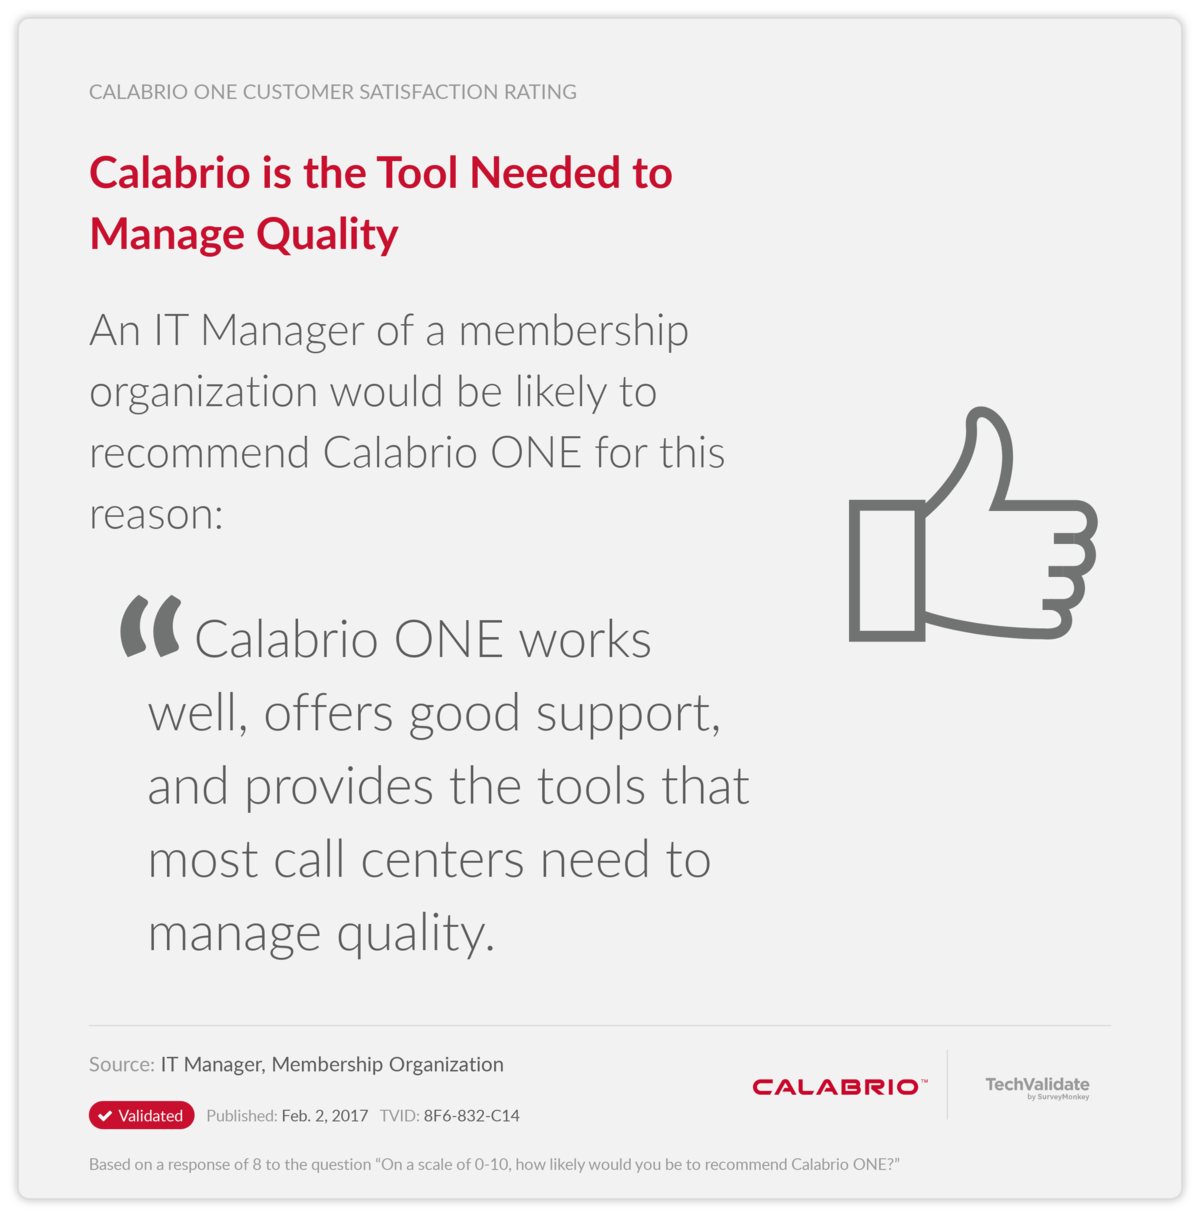 Calabrio is the Tool Needed to Manage Quality